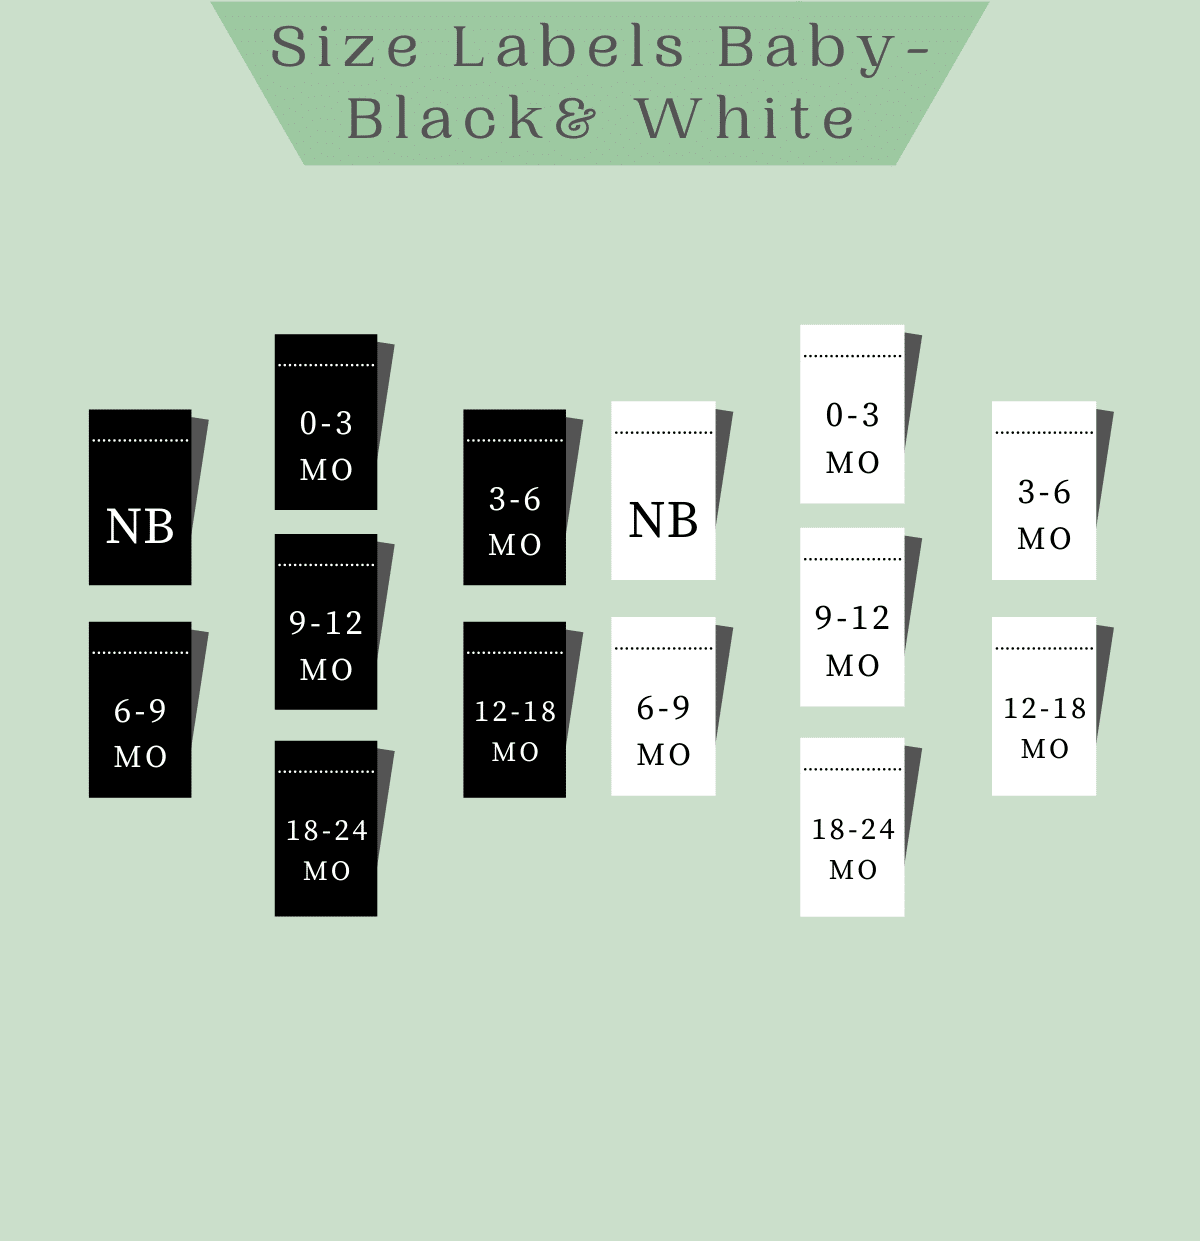 Baby Size Labels - Black & White